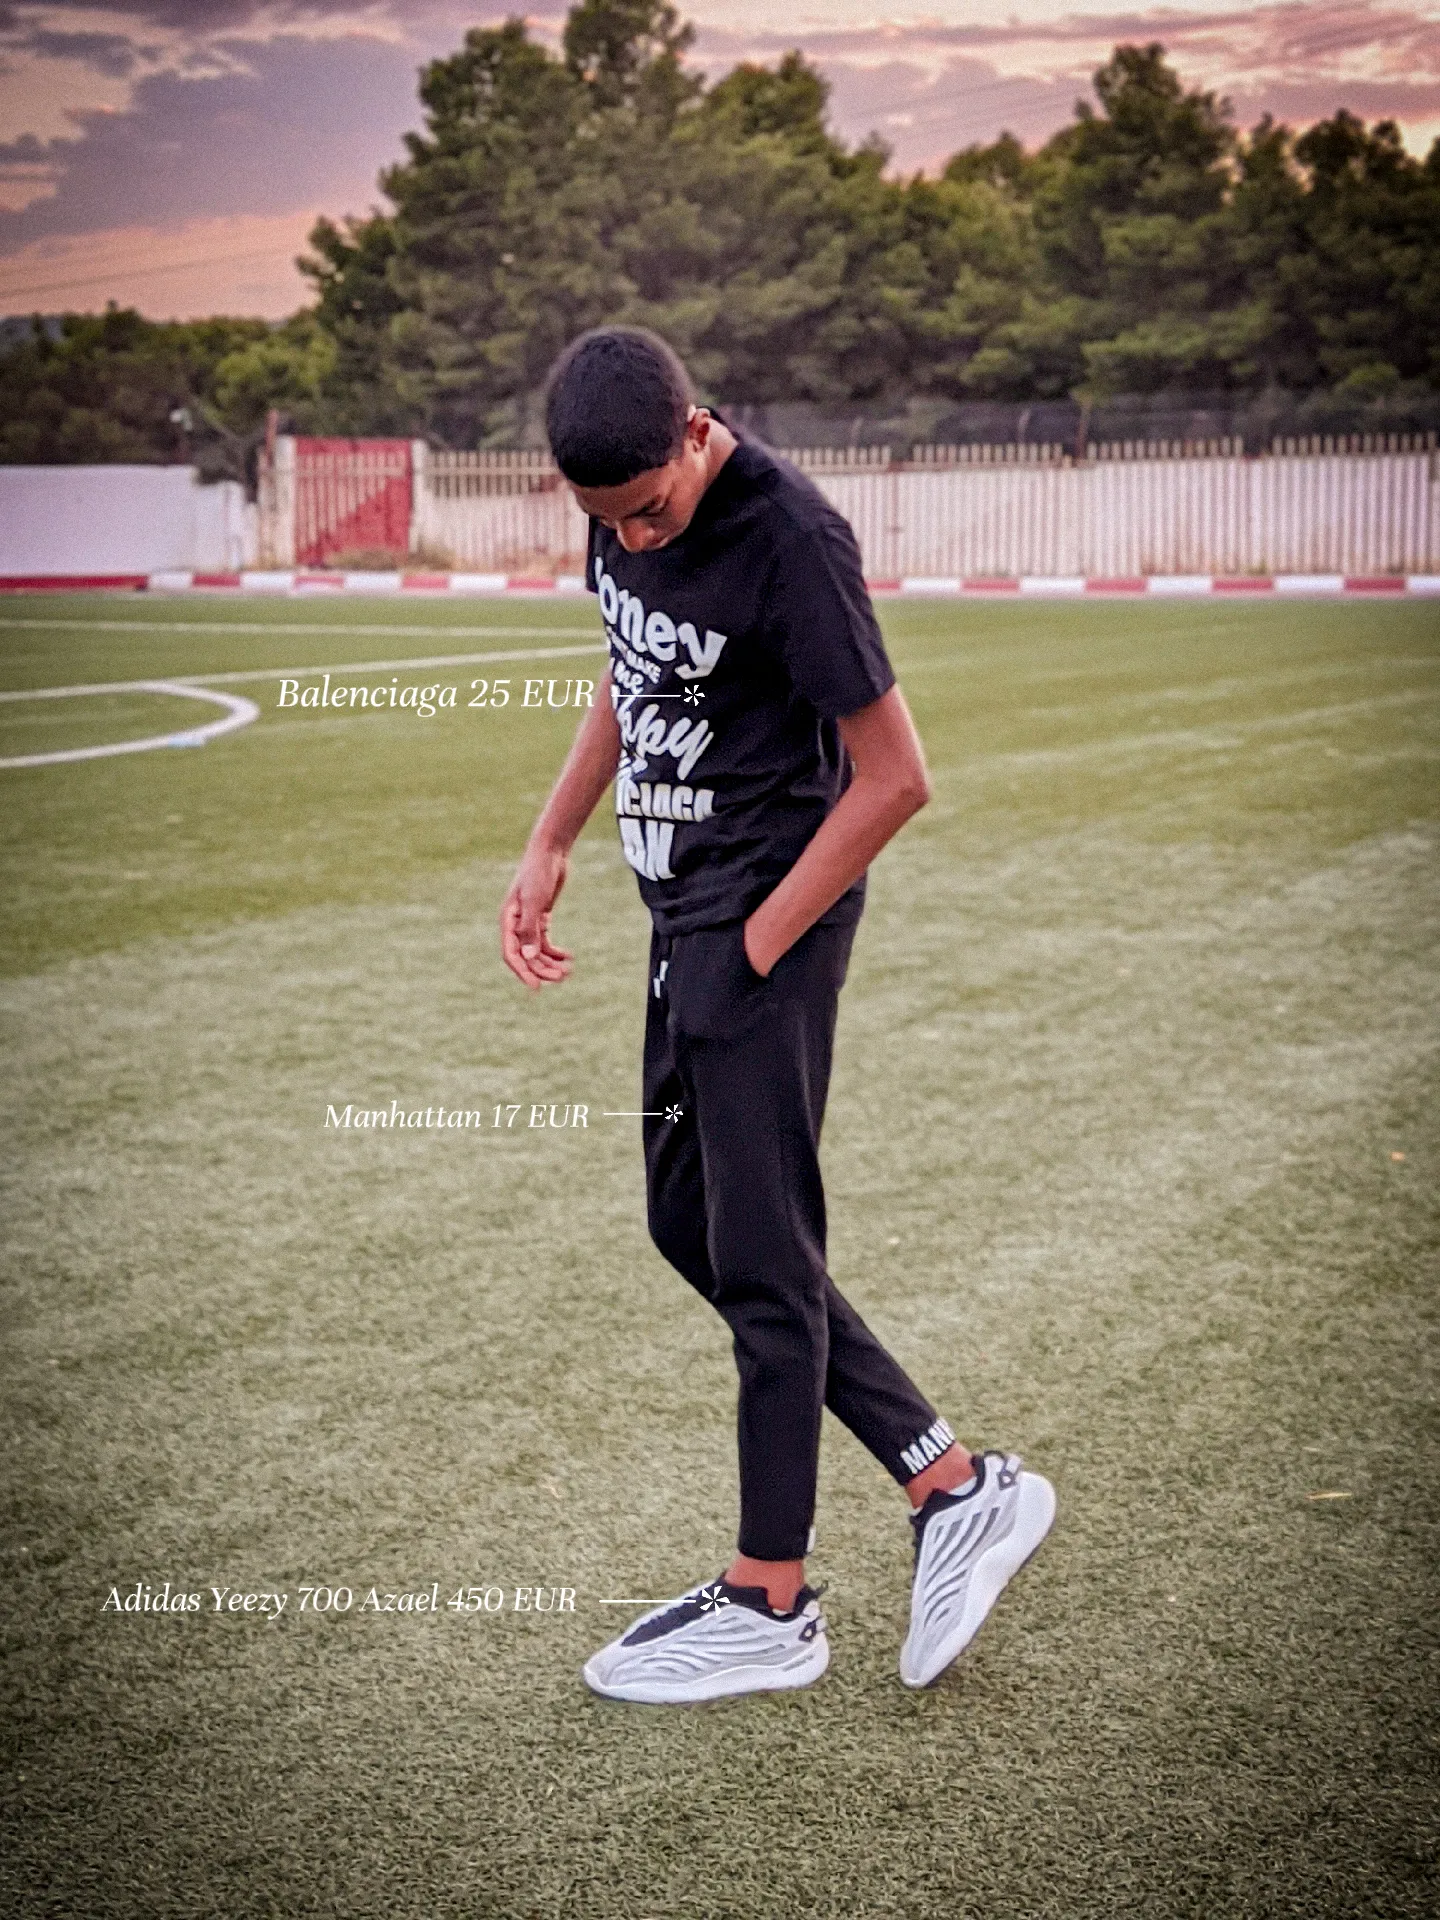 Black yeezys  Runners outfit, Black yeezys, Outfit inspiration spring